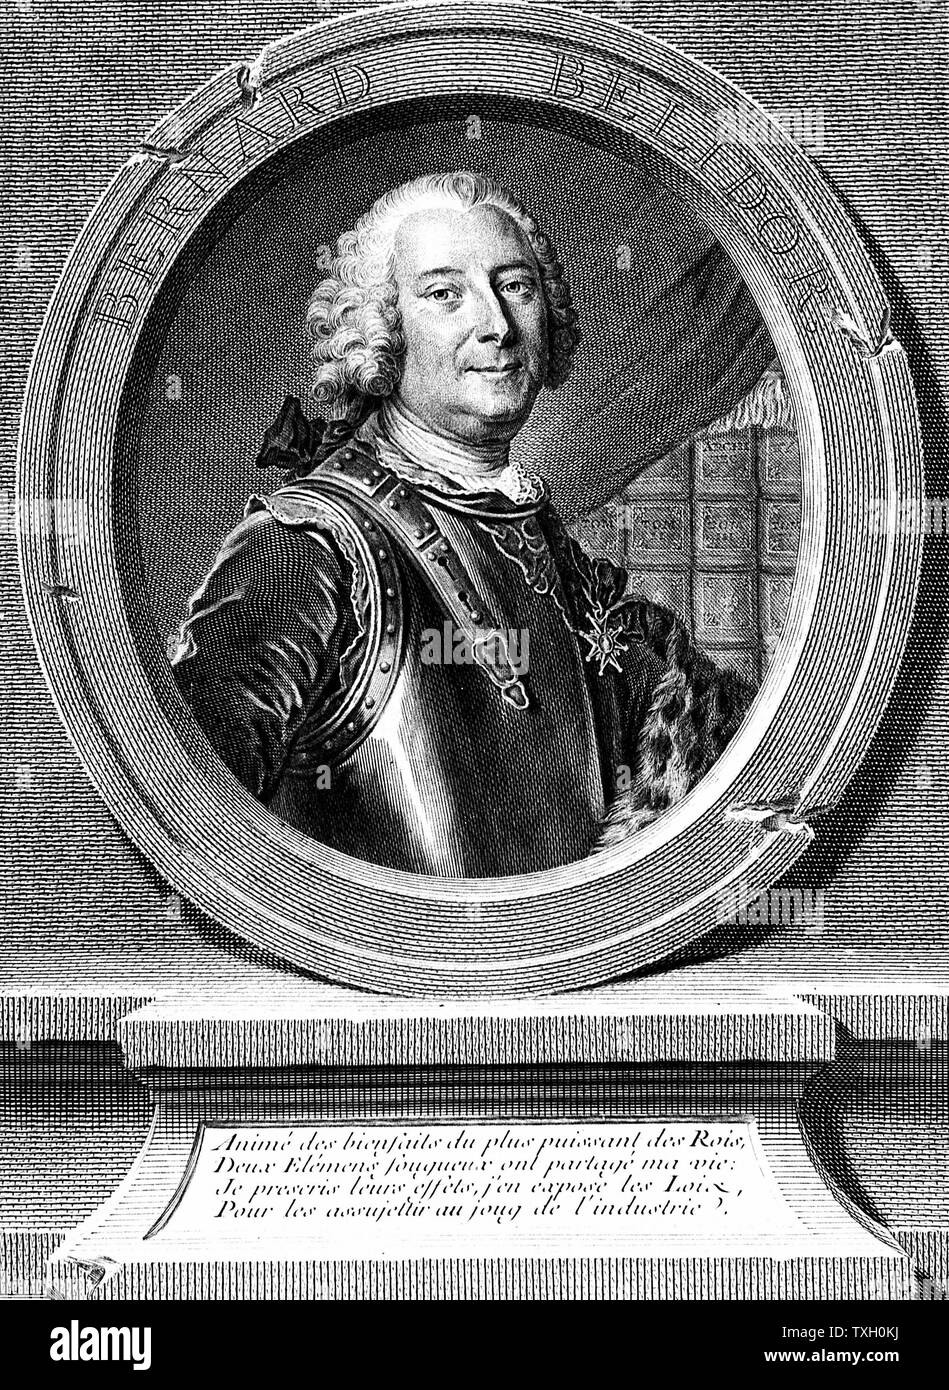 Bernard Forest Belidor (1693-c1761) French military and civil engineer. Portrait engraving frontispiece from his 'Architecture Hydraulique', Paris, 1737 Stock Photo